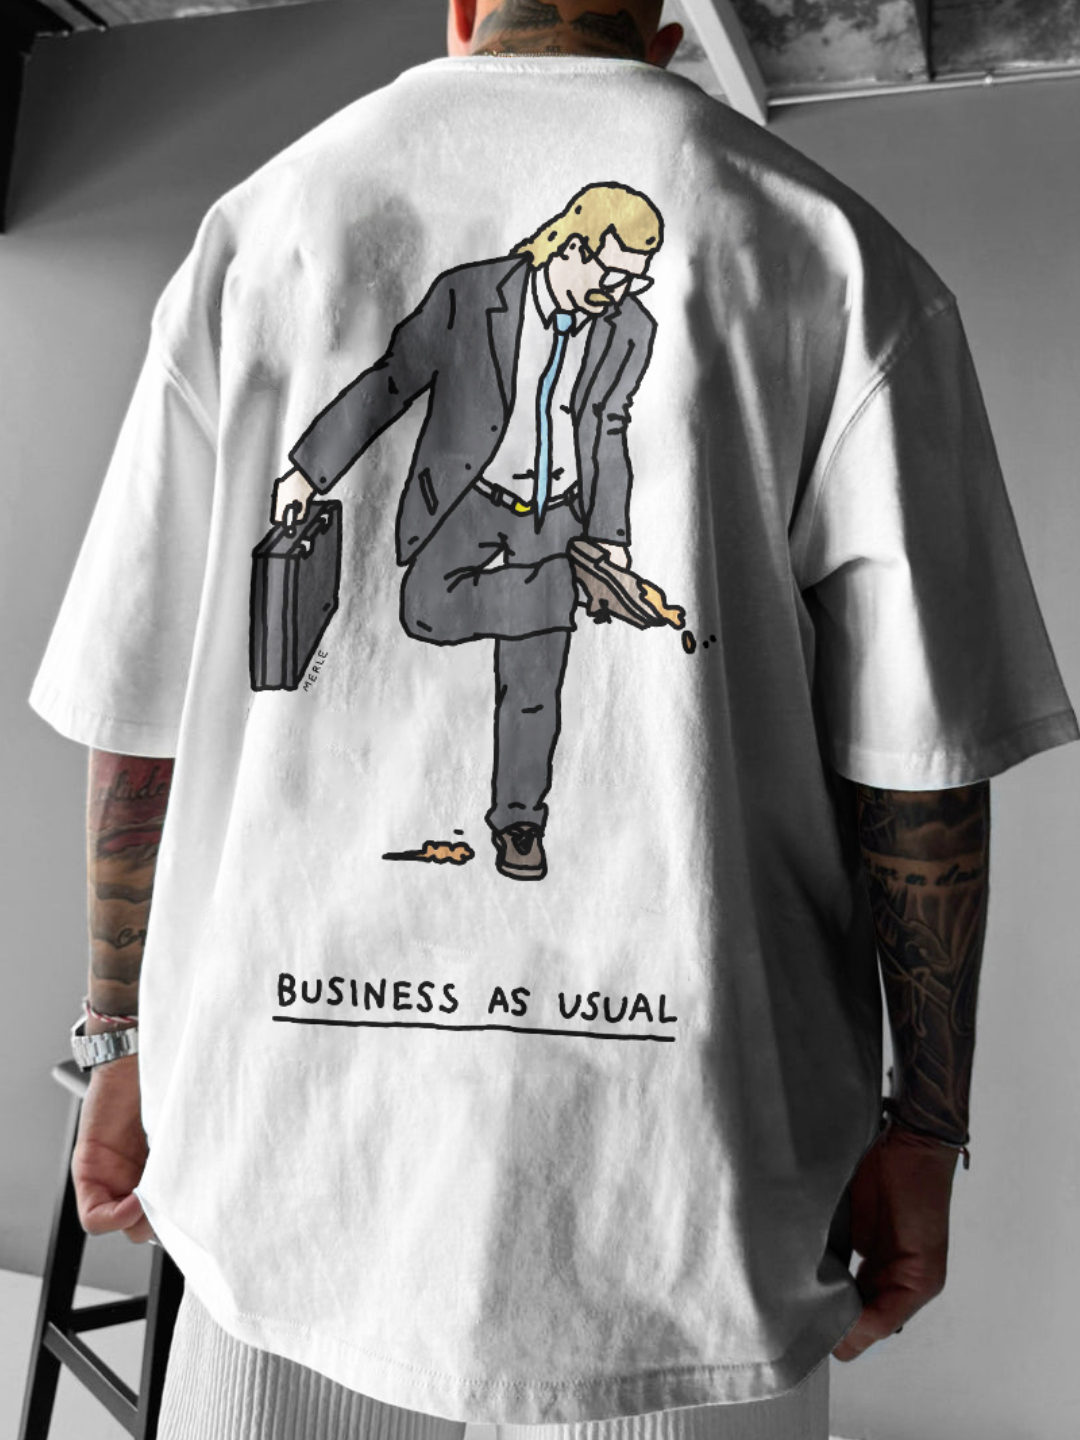 "Business as usual." Skate T-shirt